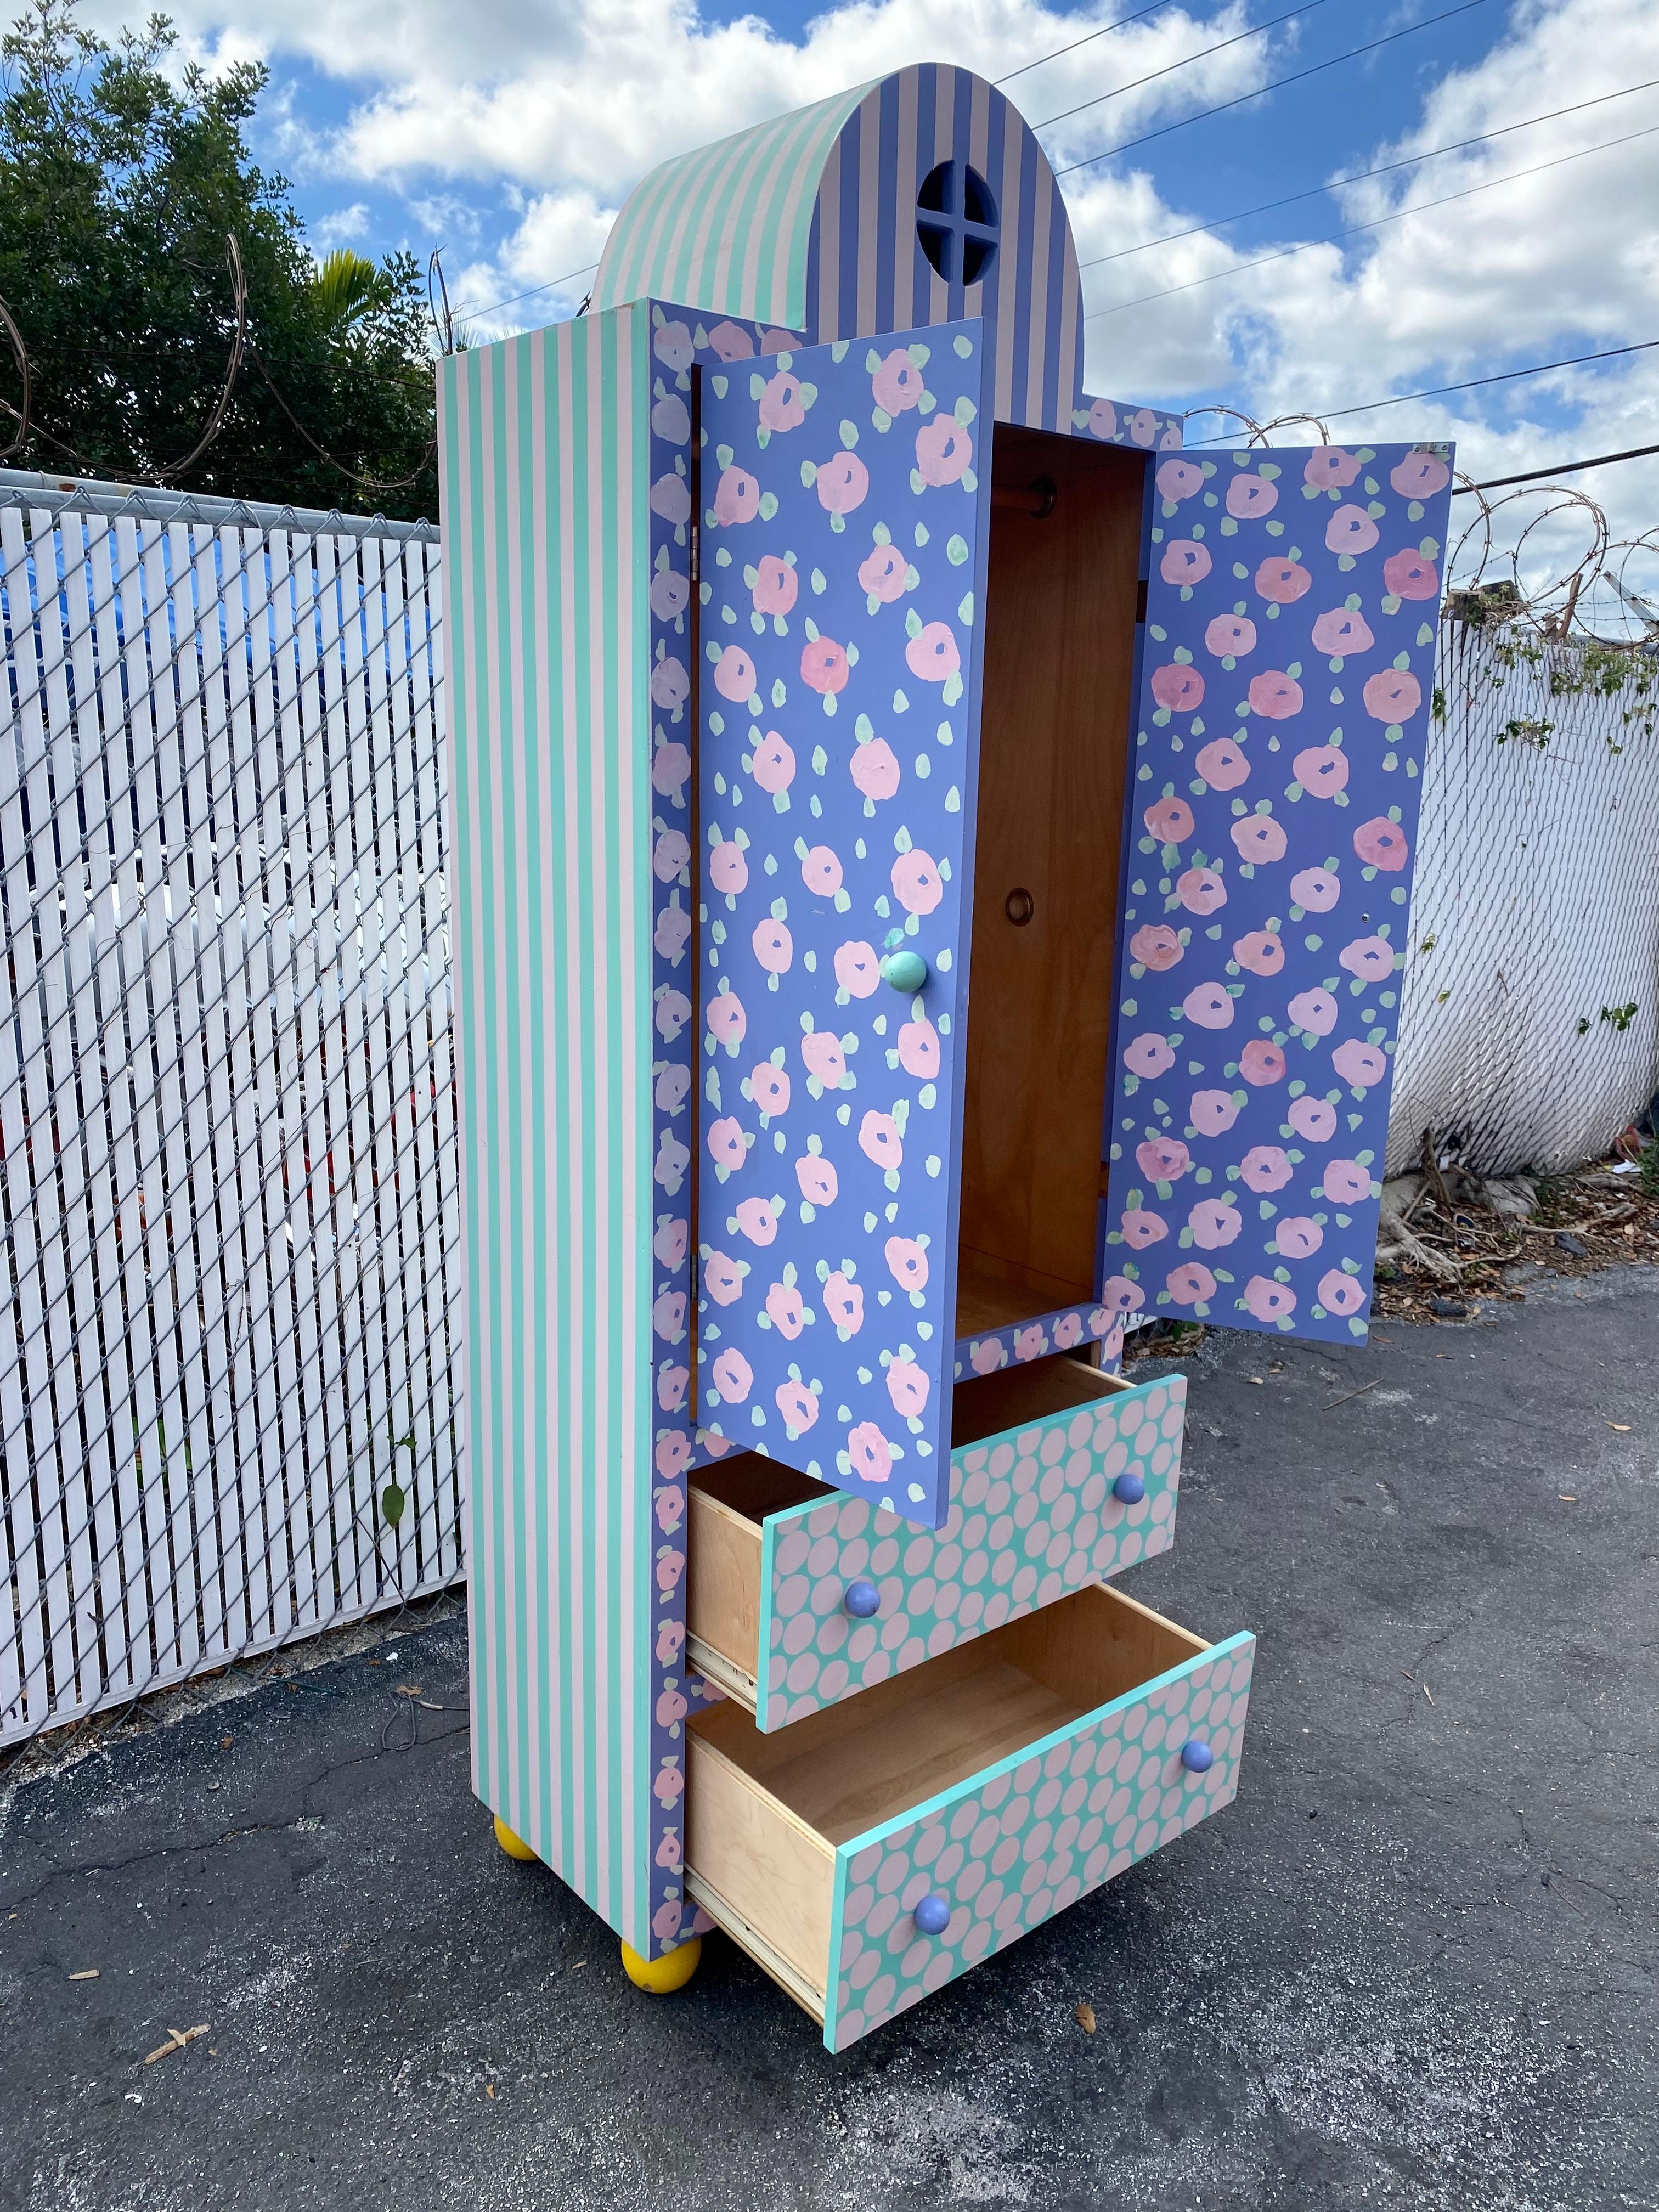 1980s Mackenzie Child Style Hand Painted Floral Stripes Wardrobe Storage Cabinet In Good Condition For Sale In Fort Lauderdale, FL